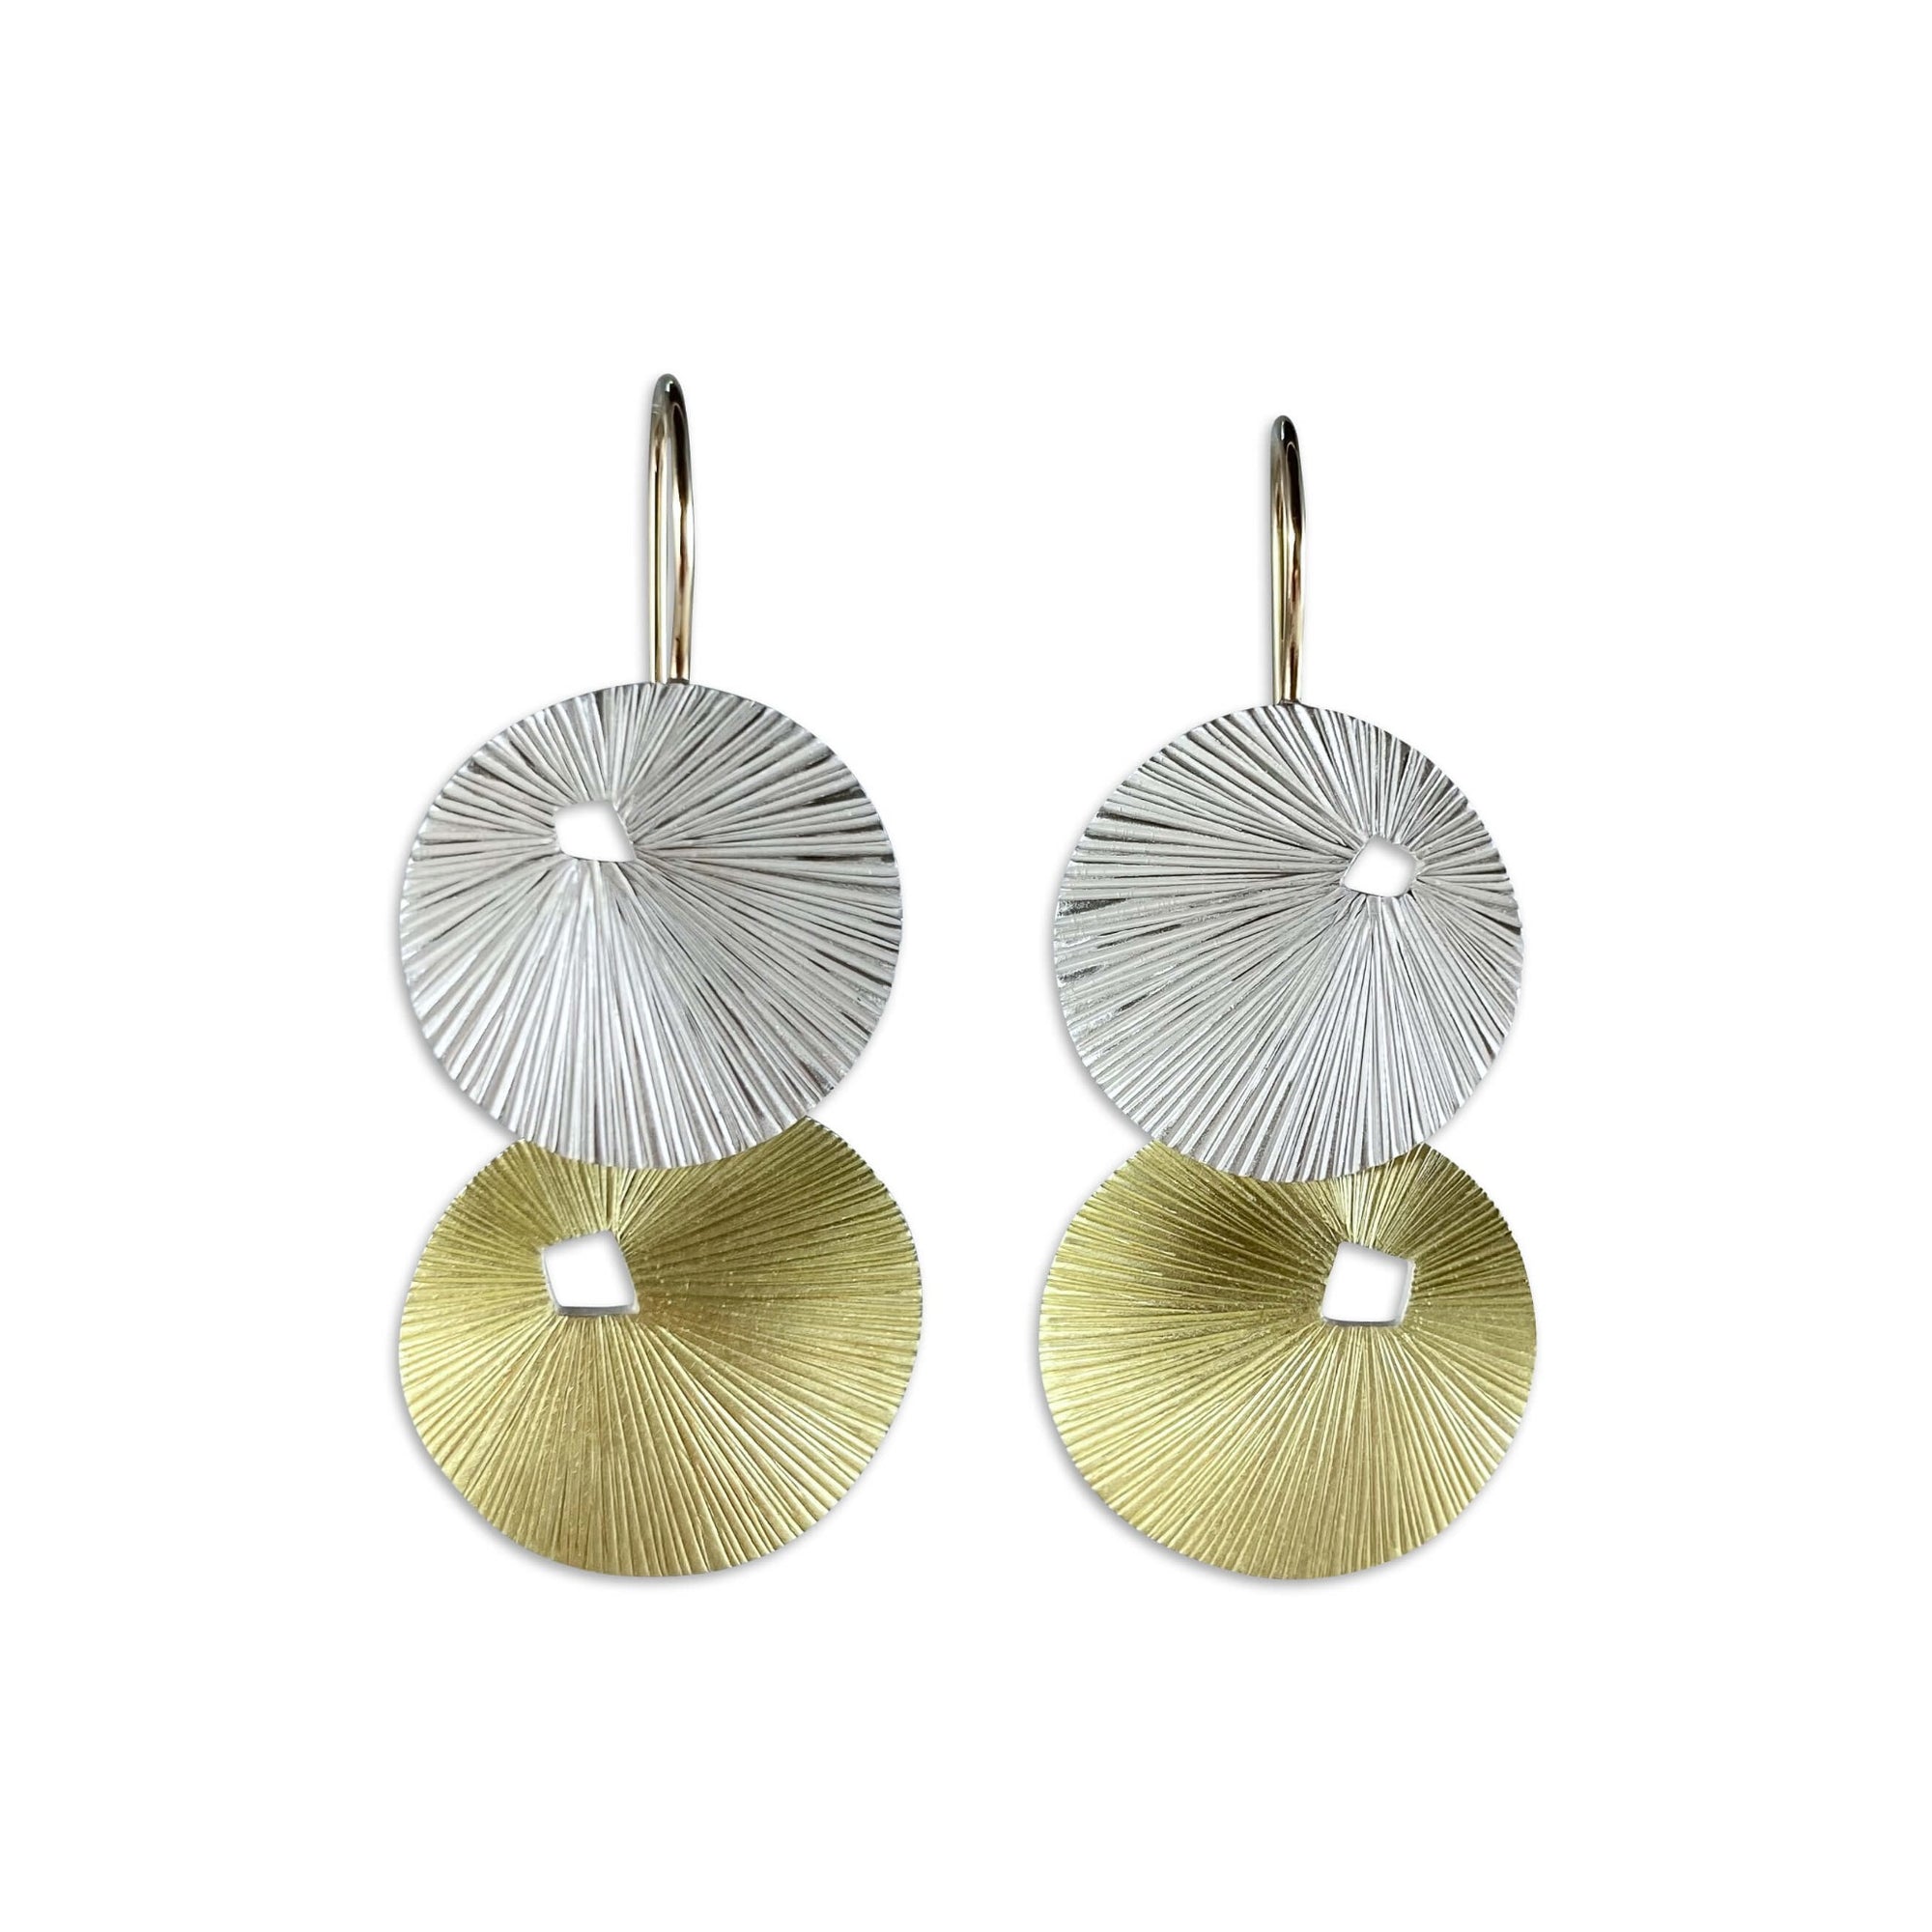 Double Textured Bright Earrings